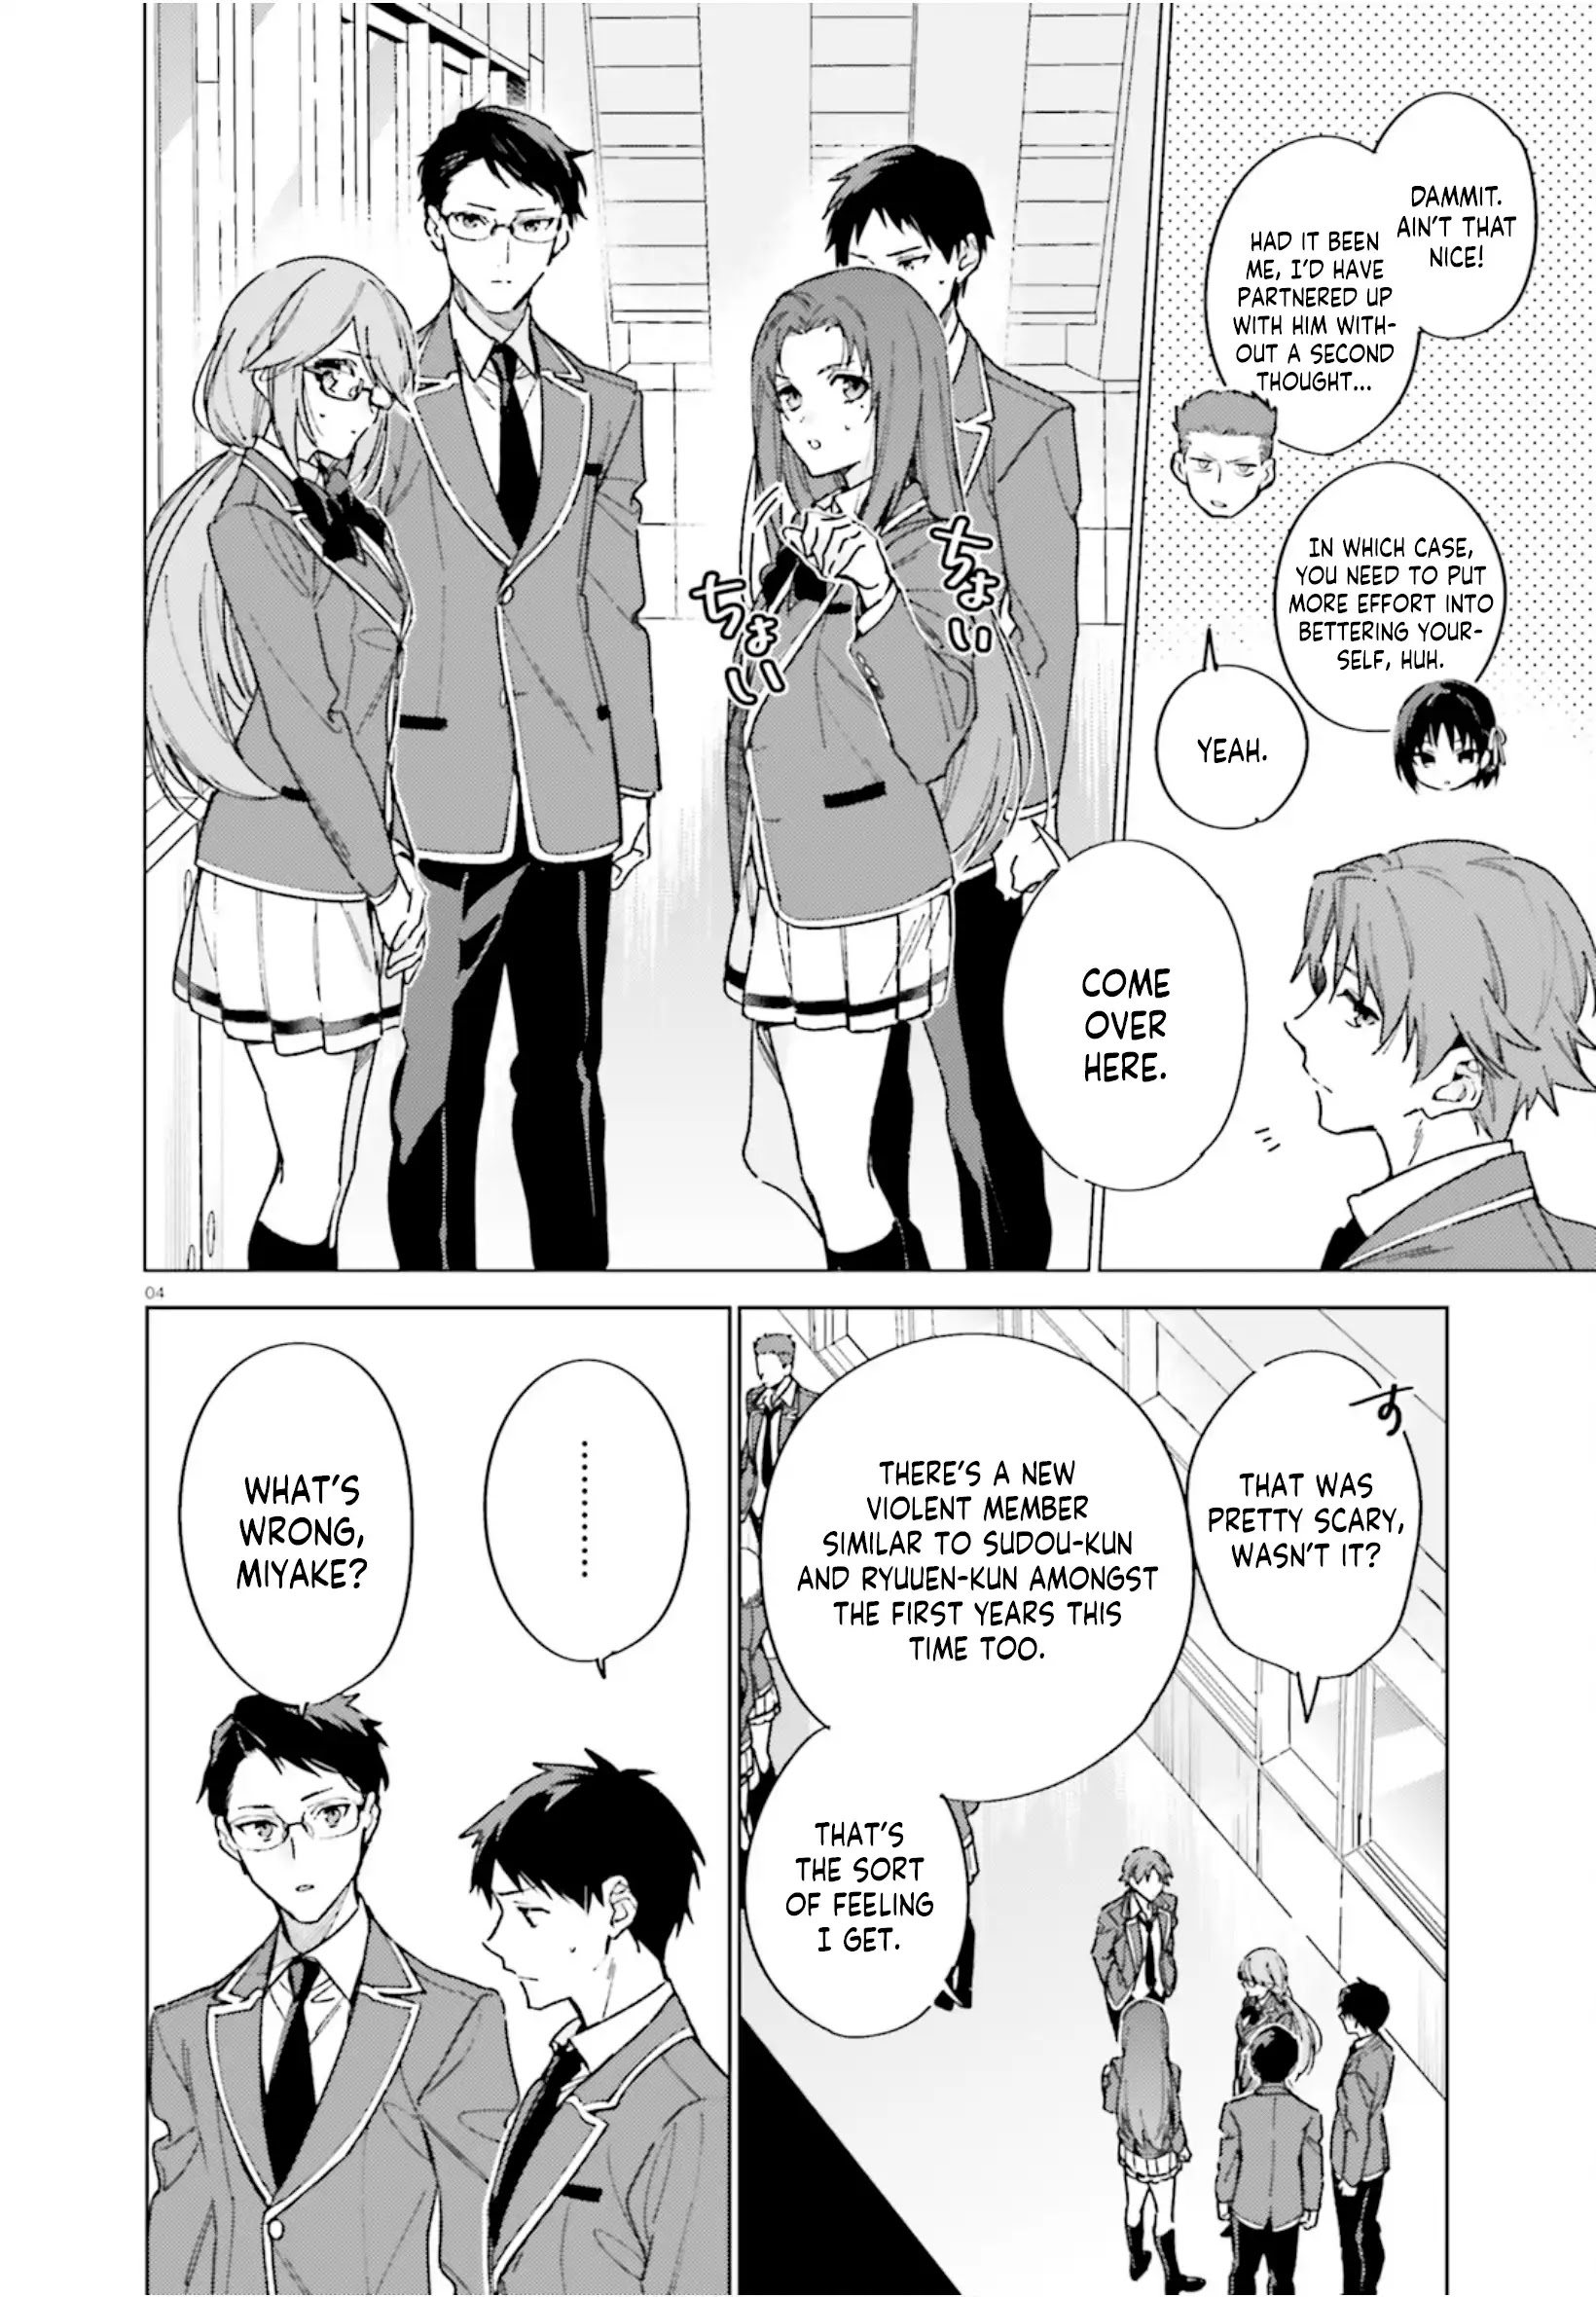 Classroom of the Elite – 2nd Year, Chapter 4 - Classroom of the Elite Manga  Online